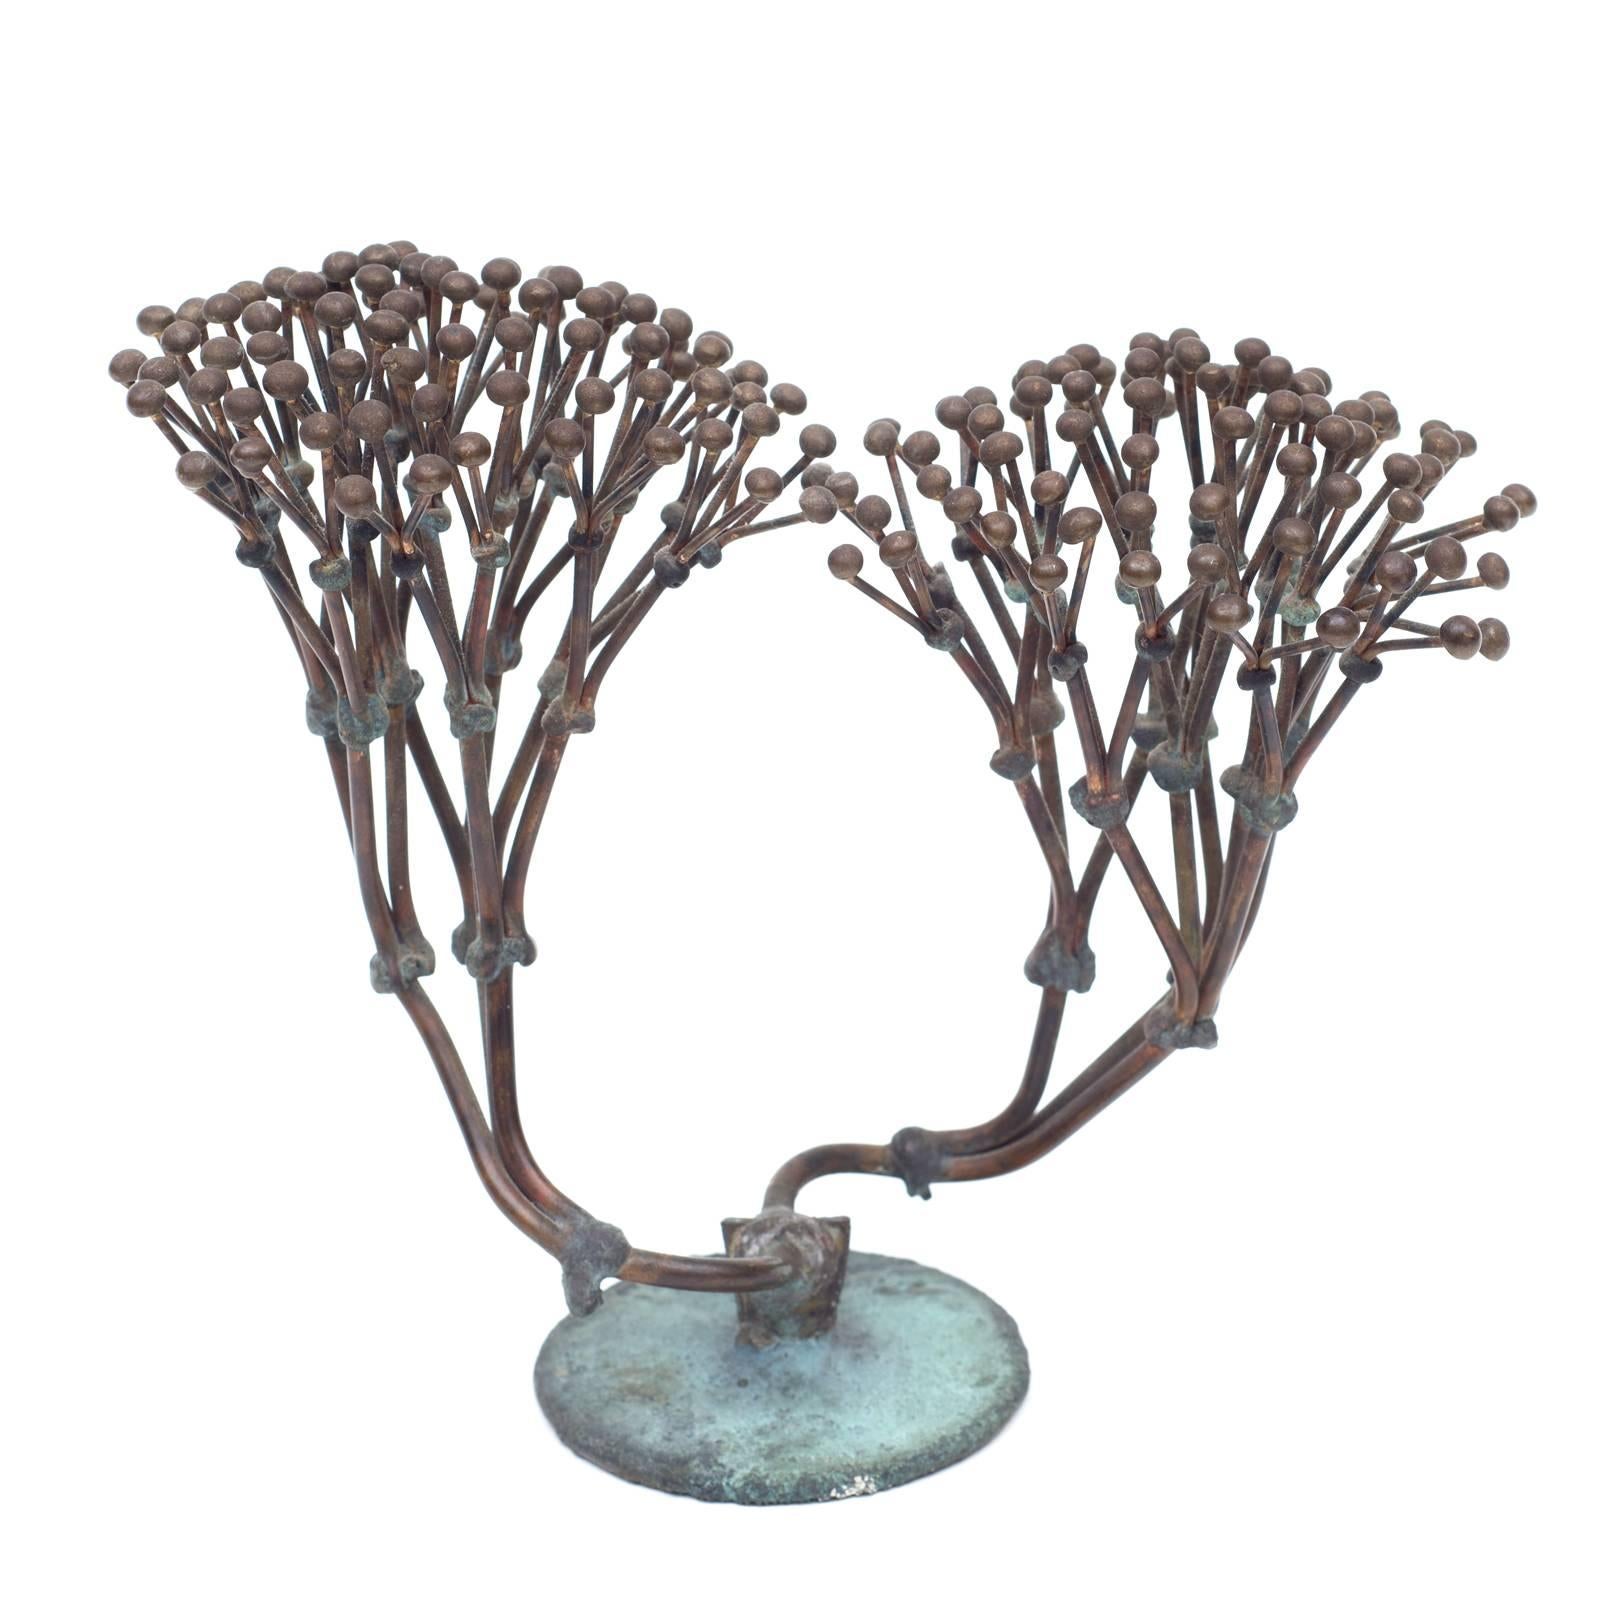 An elegant small-scale Harry Bertoia bush form. The open form exposes the details and intricate qualities that all his bush form sculptures possess but are not easily seen in the denser examples.